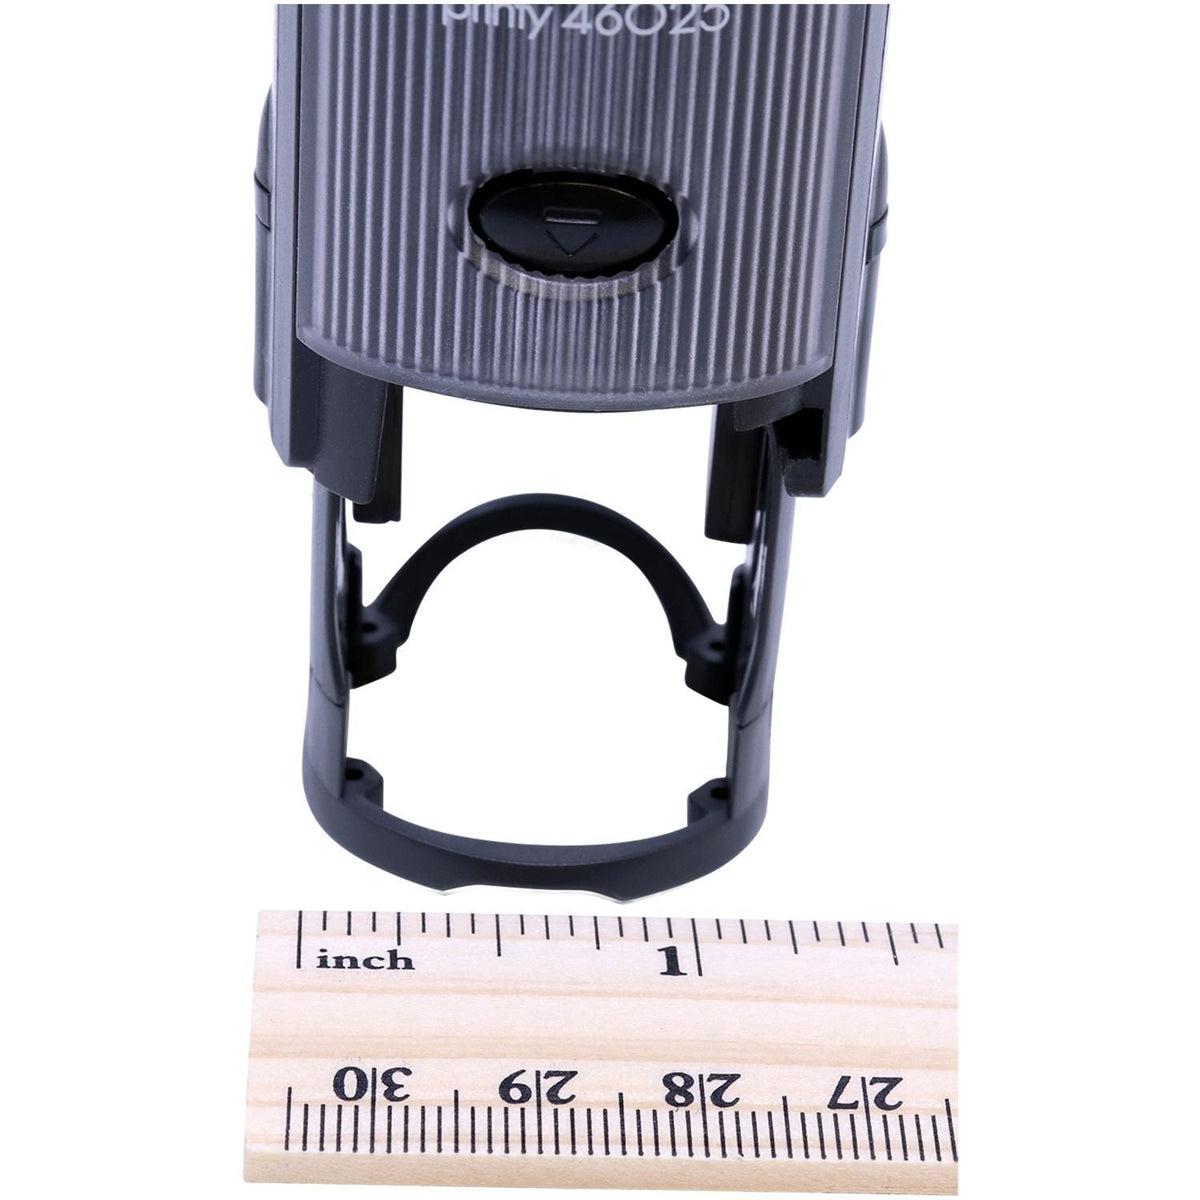 Measurment of Self-Inking Round Recycle Stamp with Ruler